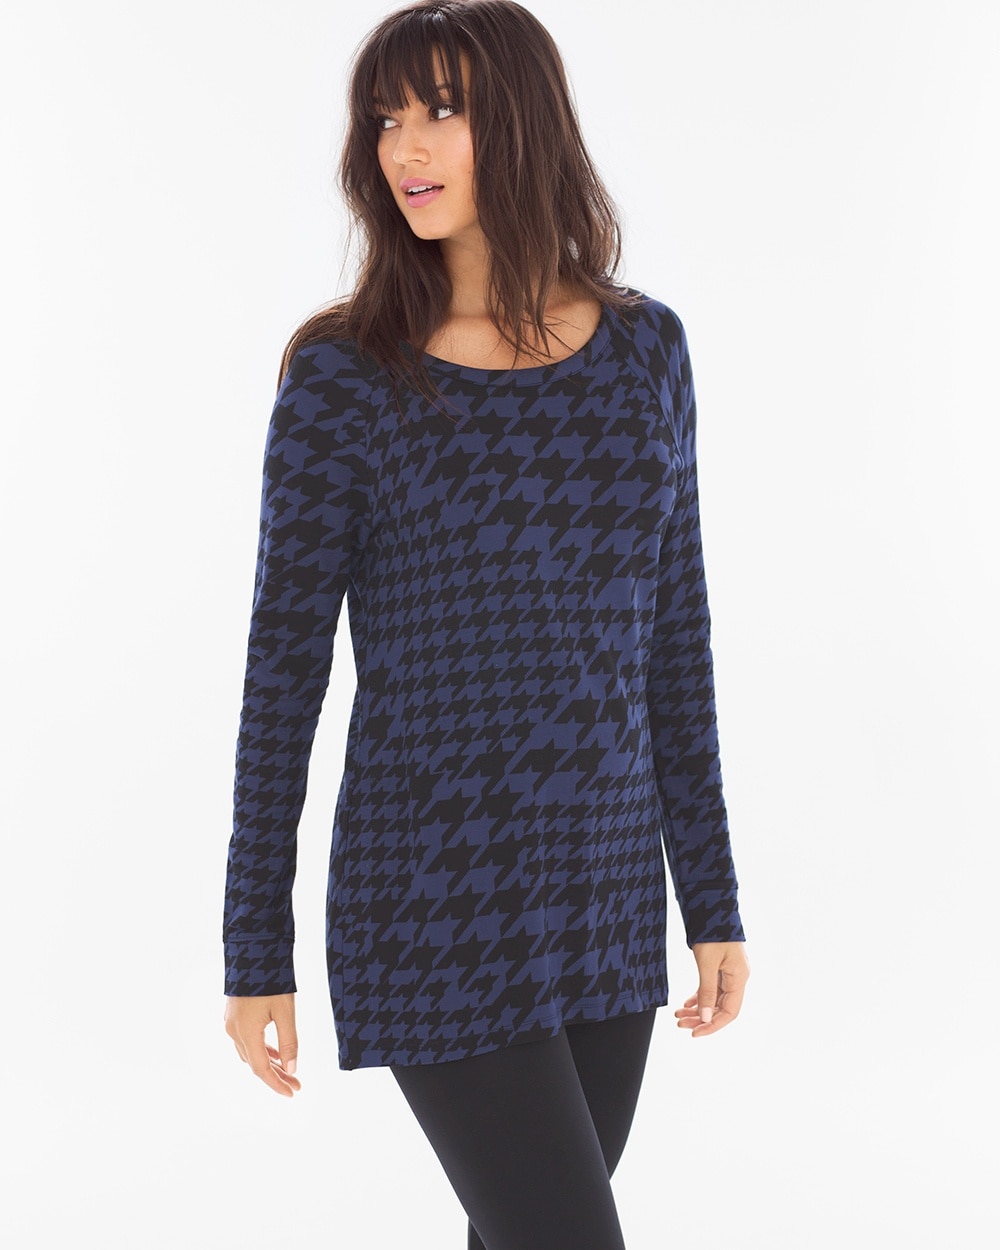 Divine Terry High Low Tunic Houndstooth Mix Navy